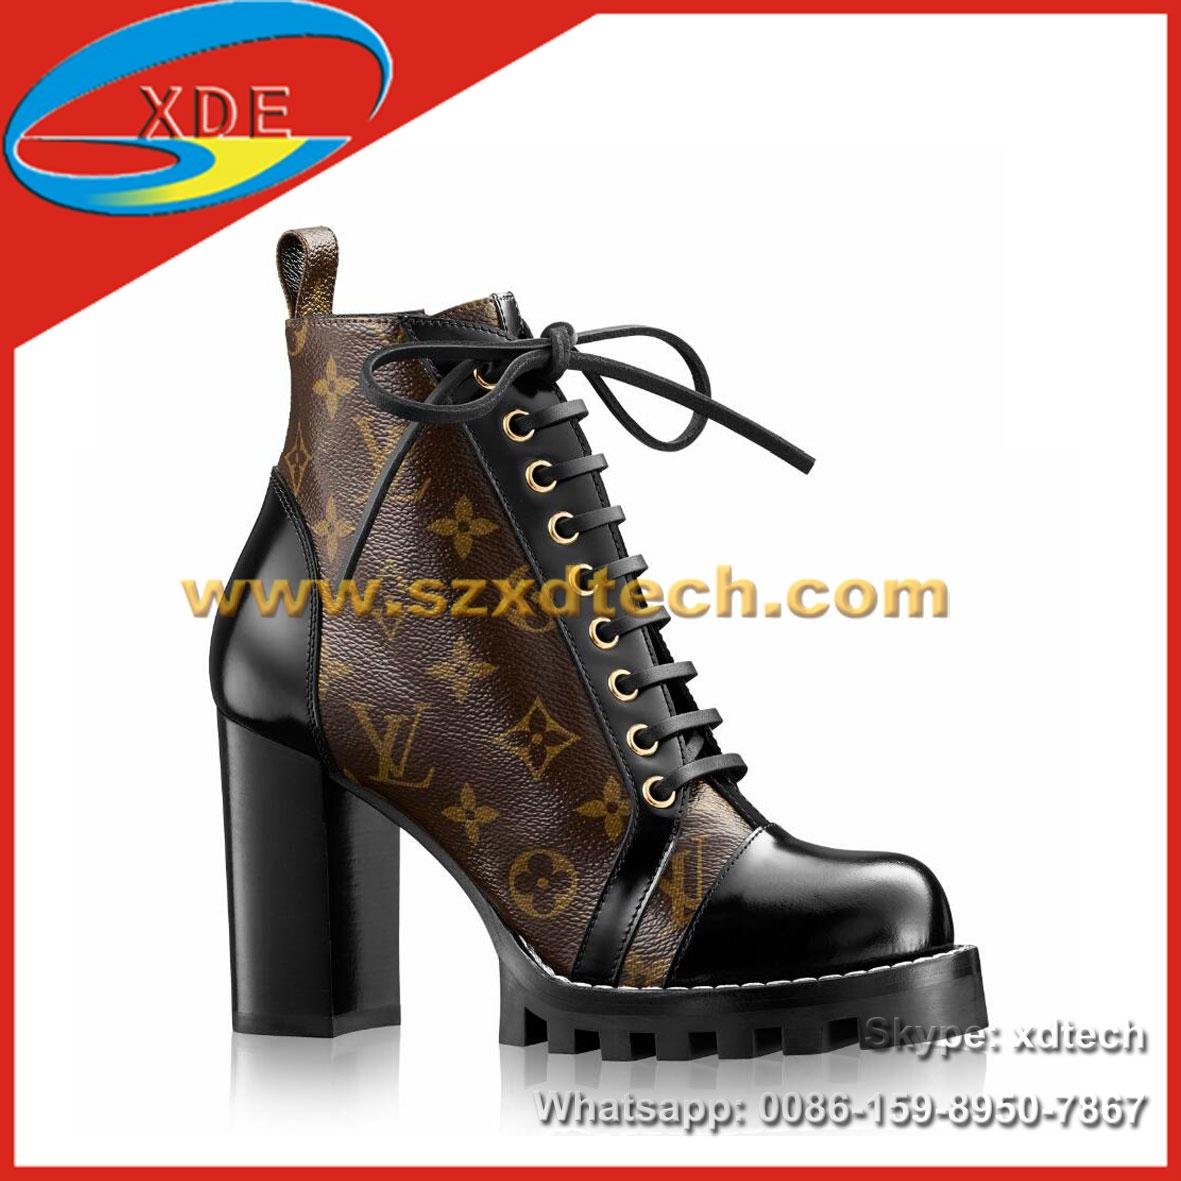 Cool STAR TRAIL ANKLE BOOT 1A2Y7W LV Boots High-heel Boots - XD-LVS58 - Louis Vuitton (China ...